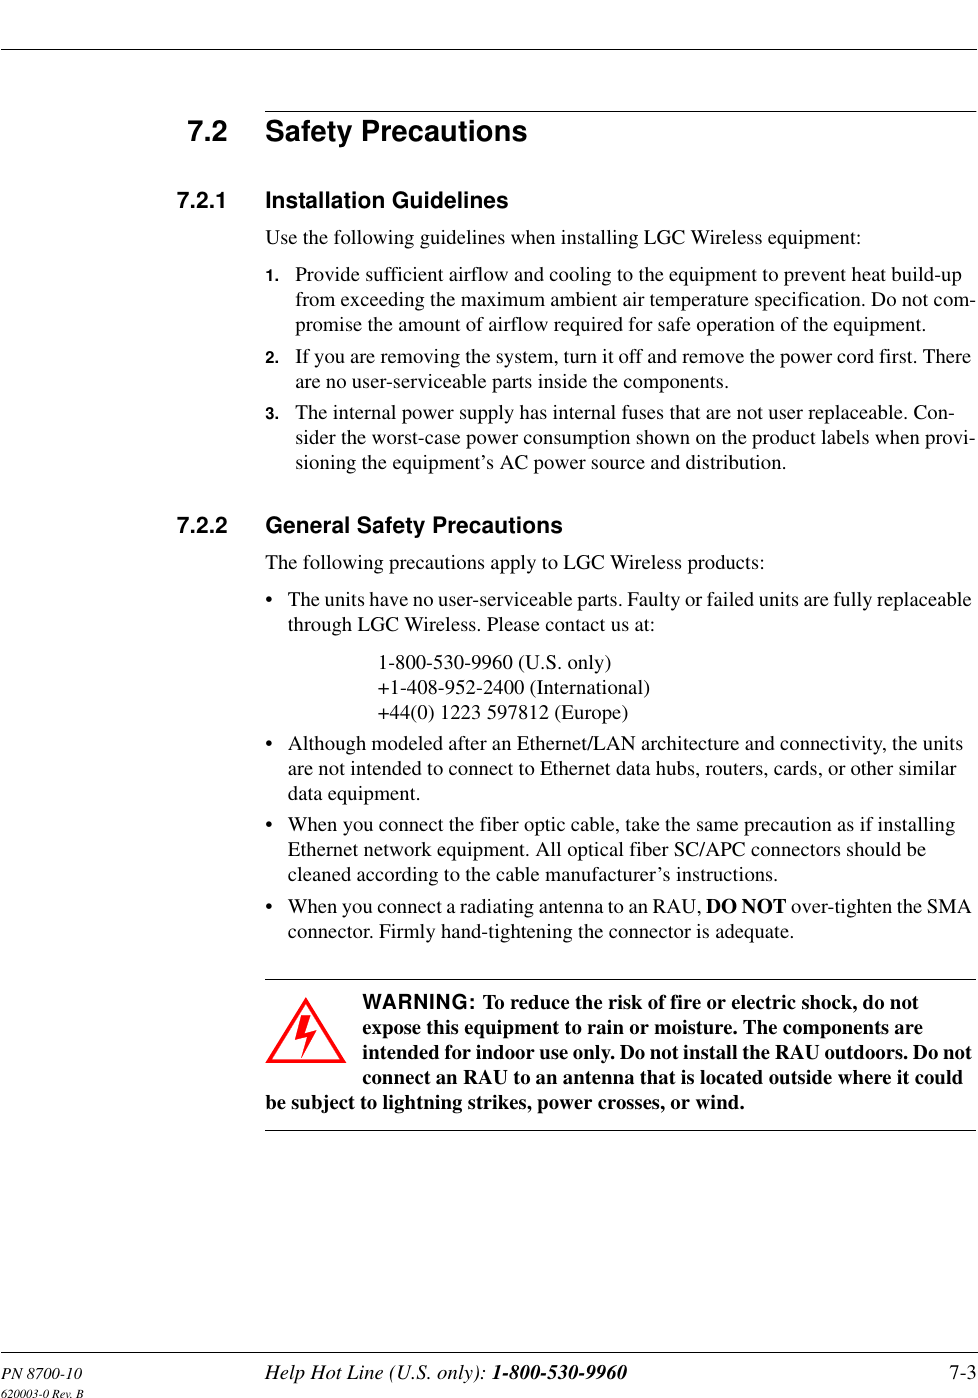 PN 8700-10 Help Hot Line (U.S. only): 1-800-530-9960 7-3620003-0 Rev. B7.2 Safety Precautions7.2.1 Installation GuidelinesUse the following guidelines when installing LGC Wireless equipment:1. Provide sufficient airflow and cooling to the equipment to prevent heat build-up from exceeding the maximum ambient air temperature specification. Do not com-promise the amount of airflow required for safe operation of the equipment.2. If you are removing the system, turn it off and remove the power cord first. There are no user-serviceable parts inside the components.3. The internal power supply has internal fuses that are not user replaceable. Con-sider the worst-case power consumption shown on the product labels when provi-sioning the equipment’s AC power source and distribution.7.2.2 General Safety PrecautionsThe following precautions apply to LGC Wireless products:• The units have no user-serviceable parts. Faulty or failed units are fully replaceable through LGC Wireless. Please contact us at:1-800-530-9960 (U.S. only)+1-408-952-2400 (International)+44(0) 1223 597812 (Europe)• Although modeled after an Ethernet/LAN architecture and connectivity, the units are not intended to connect to Ethernet data hubs, routers, cards, or other similar data equipment.• When you connect the fiber optic cable, take the same precaution as if installing Ethernet network equipment. All optical fiber SC/APC connectors should be cleaned according to the cable manufacturer’s instructions.• When you connect a radiating antenna to an RAU, DO NOT over-tighten the SMA connector. Firmly hand-tightening the connector is adequate.WARNING: To reduce the risk of fire or electric shock, do not expose this equipment to rain or moisture. The components are intended for indoor use only. Do not install the RAU outdoors. Do not connect an RAU to an antenna that is located outside where it could be subject to lightning strikes, power crosses, or wind.